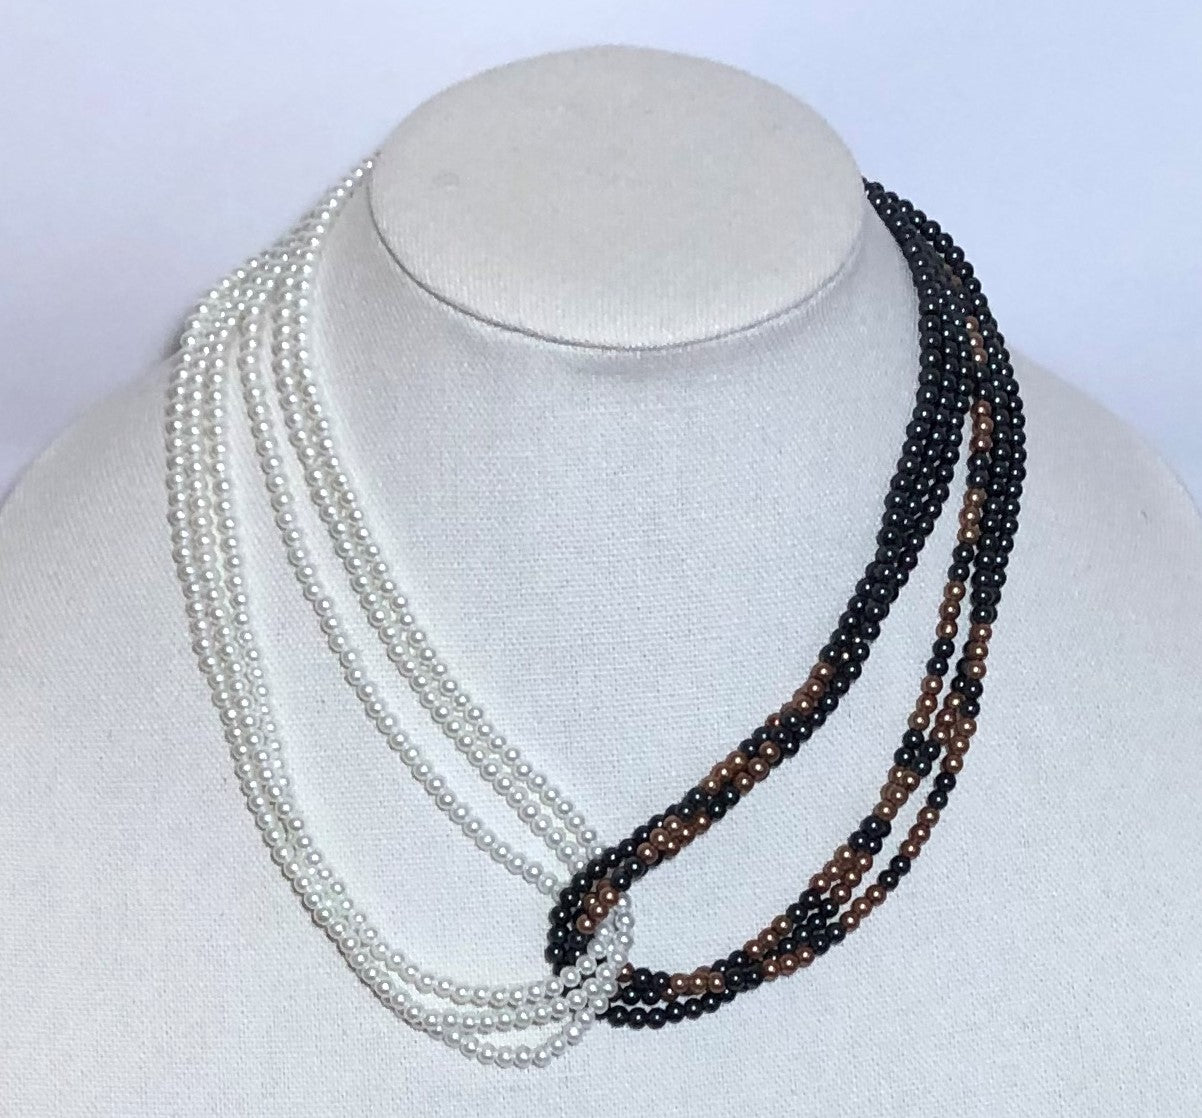 Looped Pearls Necklace